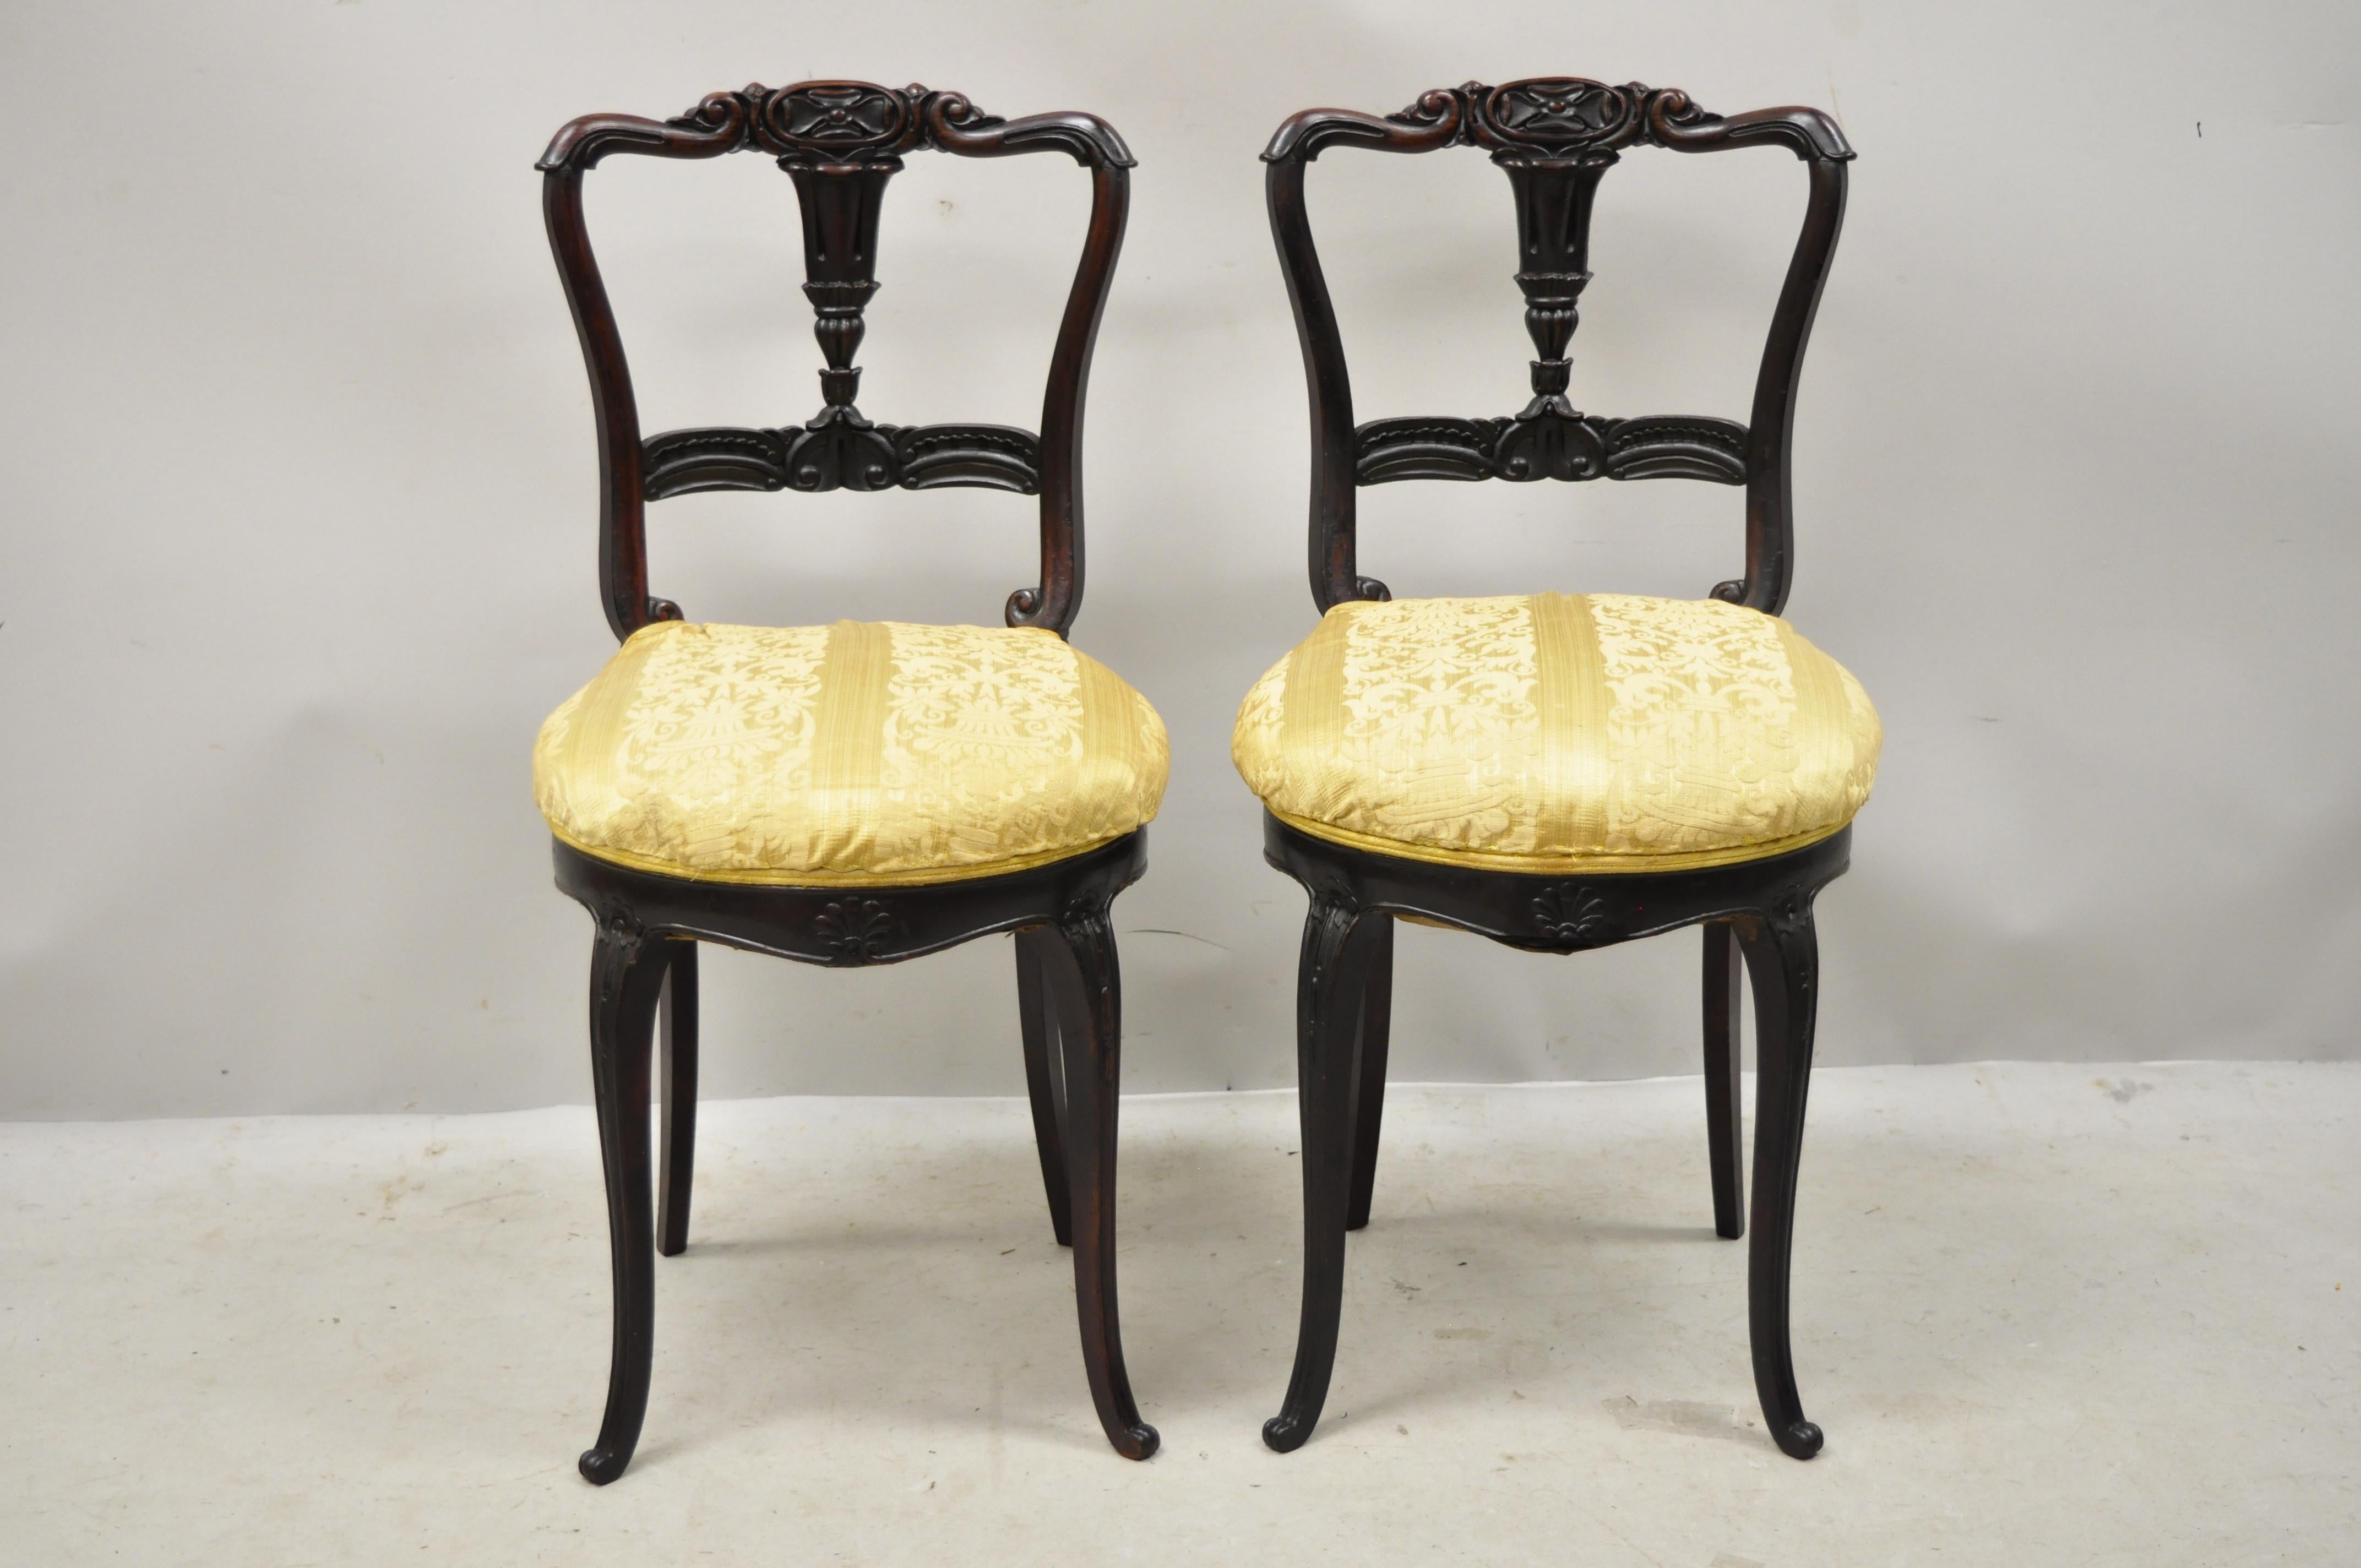 Antique French Victorian carved rosewood small petite accent side chairs - a pair. Item features a small petite size, beautiful dark rosewood frames, upholstered seats, nicely carved details, petite cabriole legs, very nice antique pair,
circa